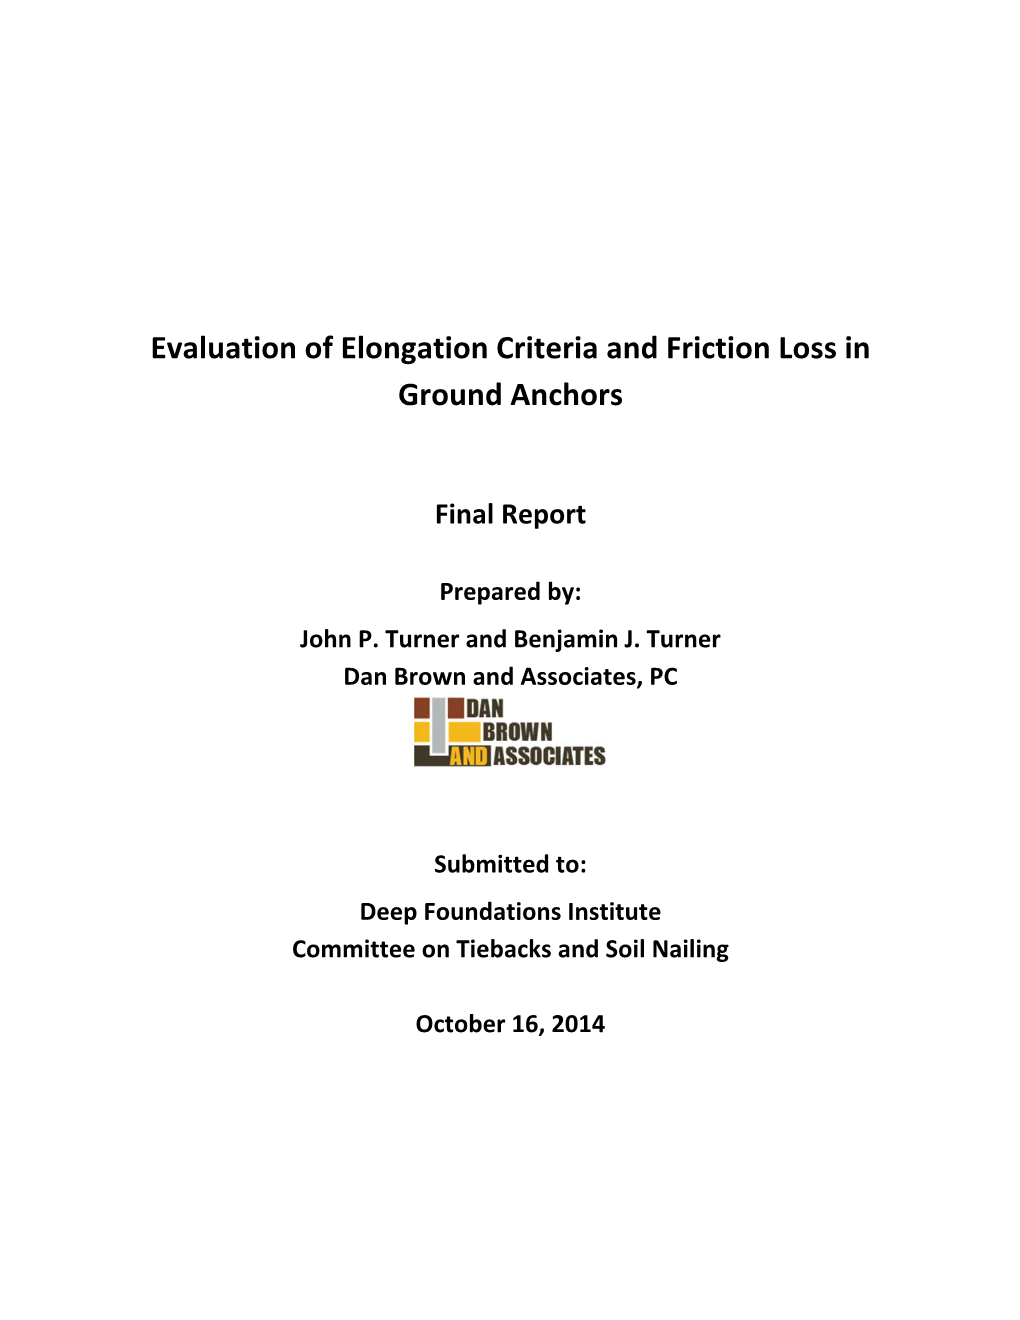 Evaluation of Elongation Criteria and Friction Loss in Ground Anchors